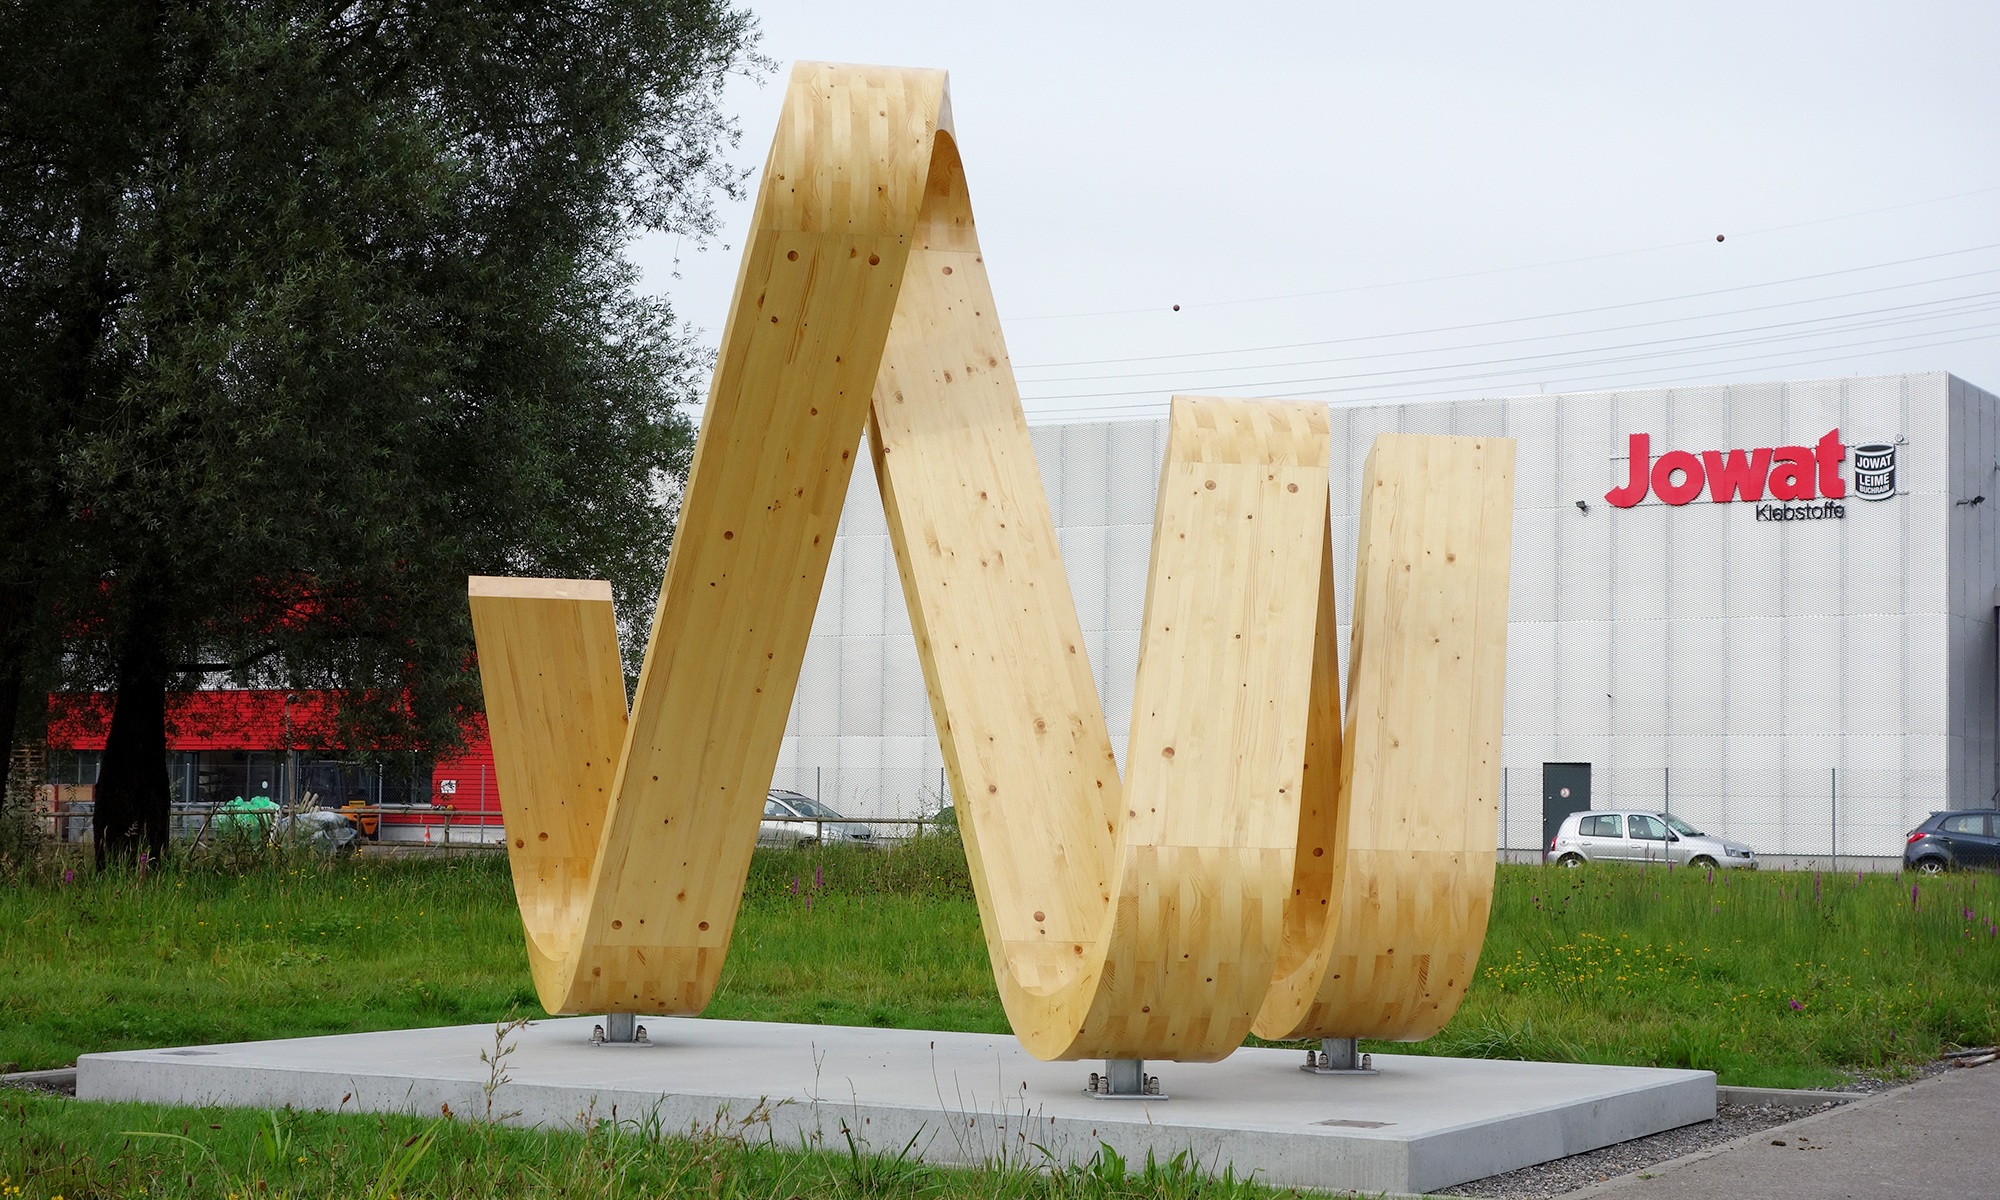 The sculpture for Jowat was created in collaboration with artist Urs Twellmann.